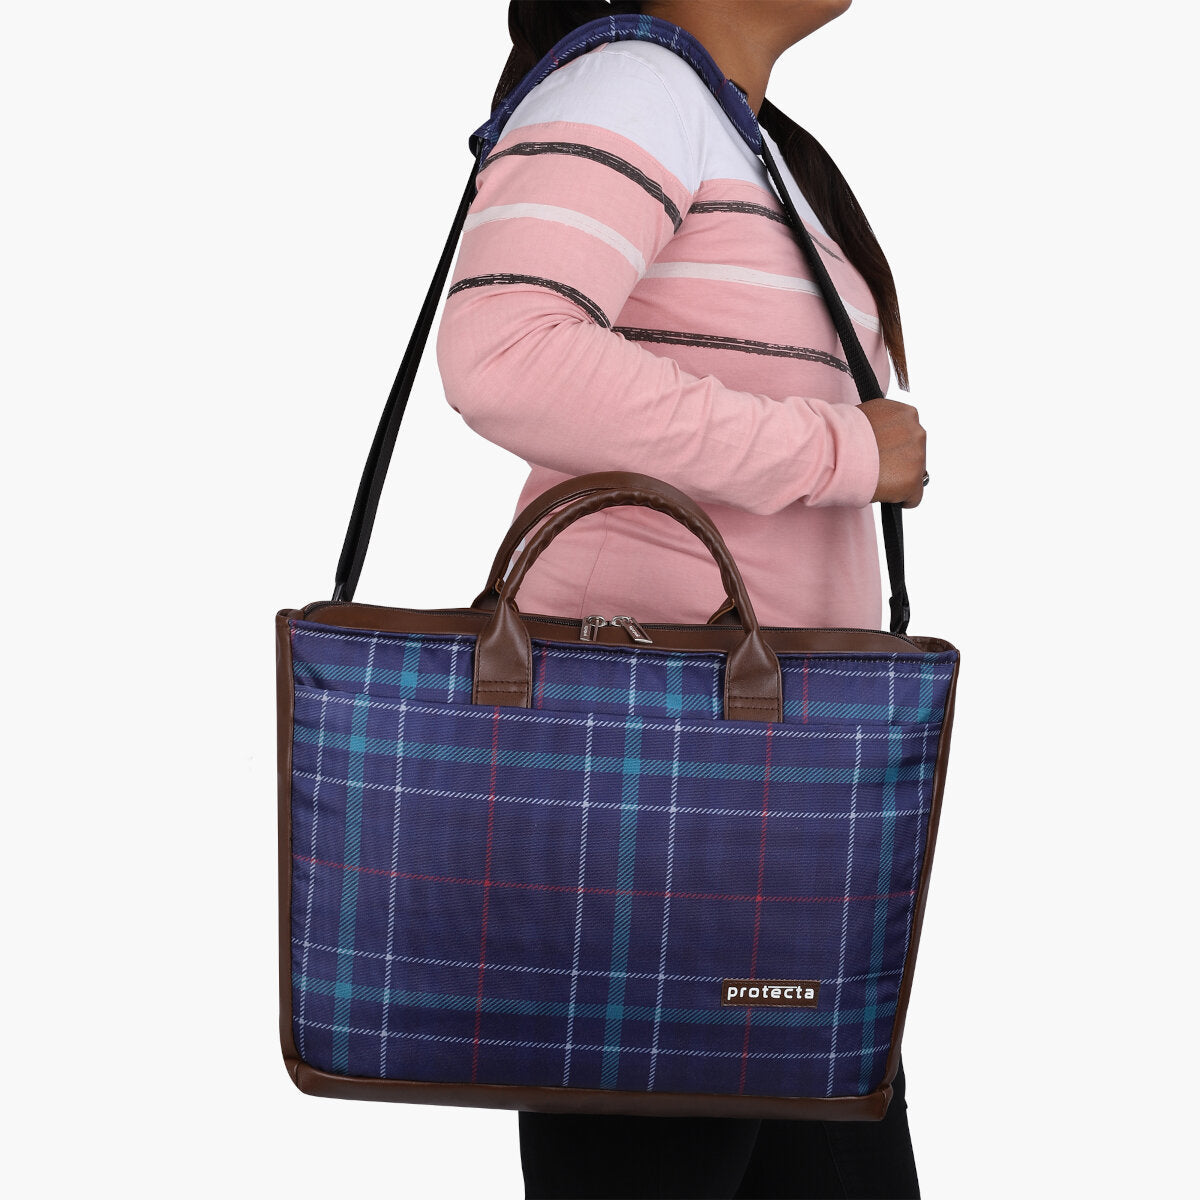 Plaid Print | Protecta Evenly Poised Office Laptop Bag for Women - 7